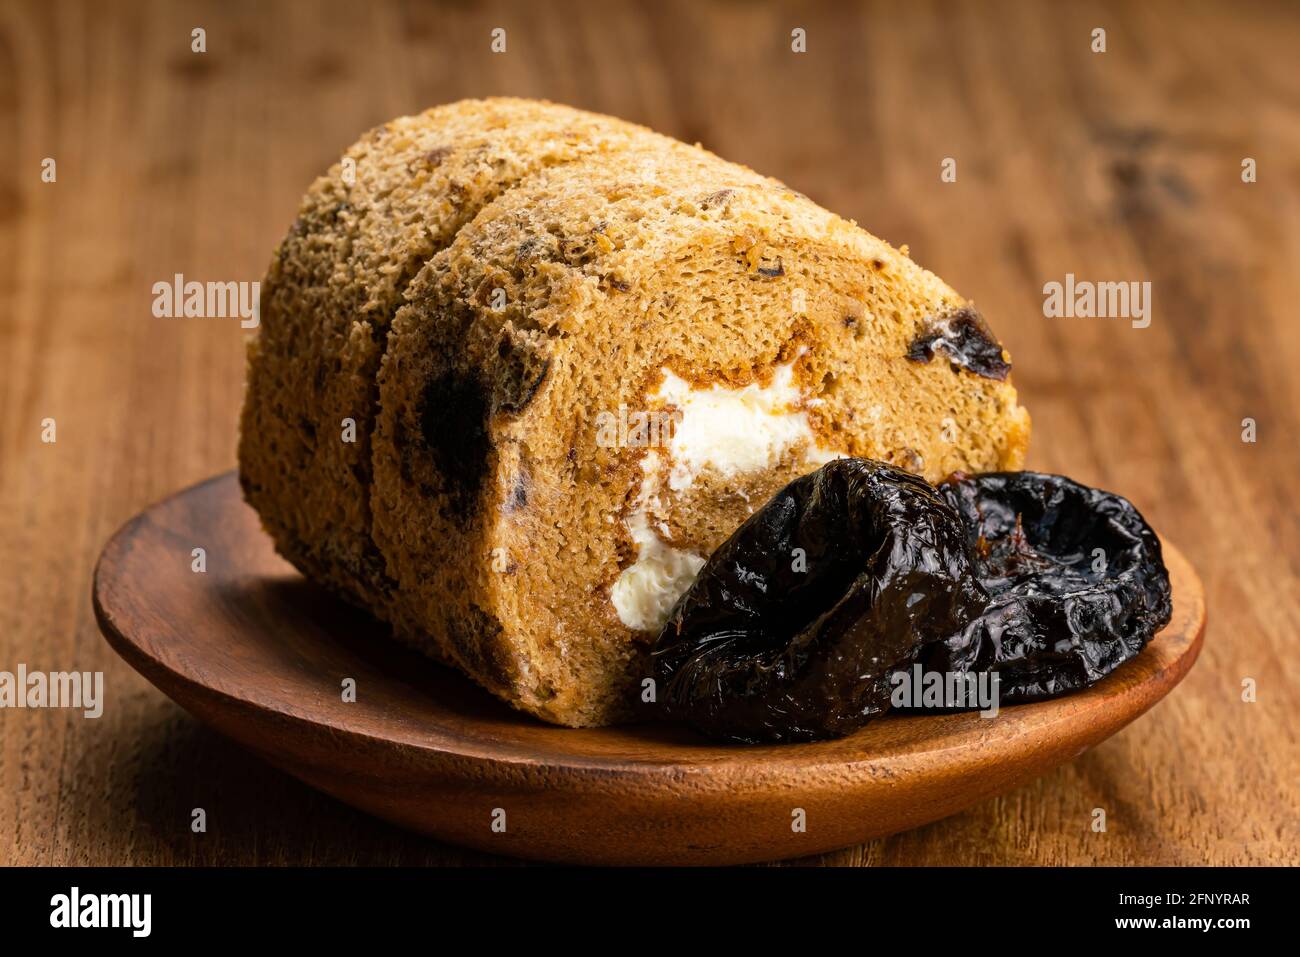 Closeup view of homemade prune sponge cake roll and dried pitted prune fruits in wooden plate on wooden table. Stock Photo